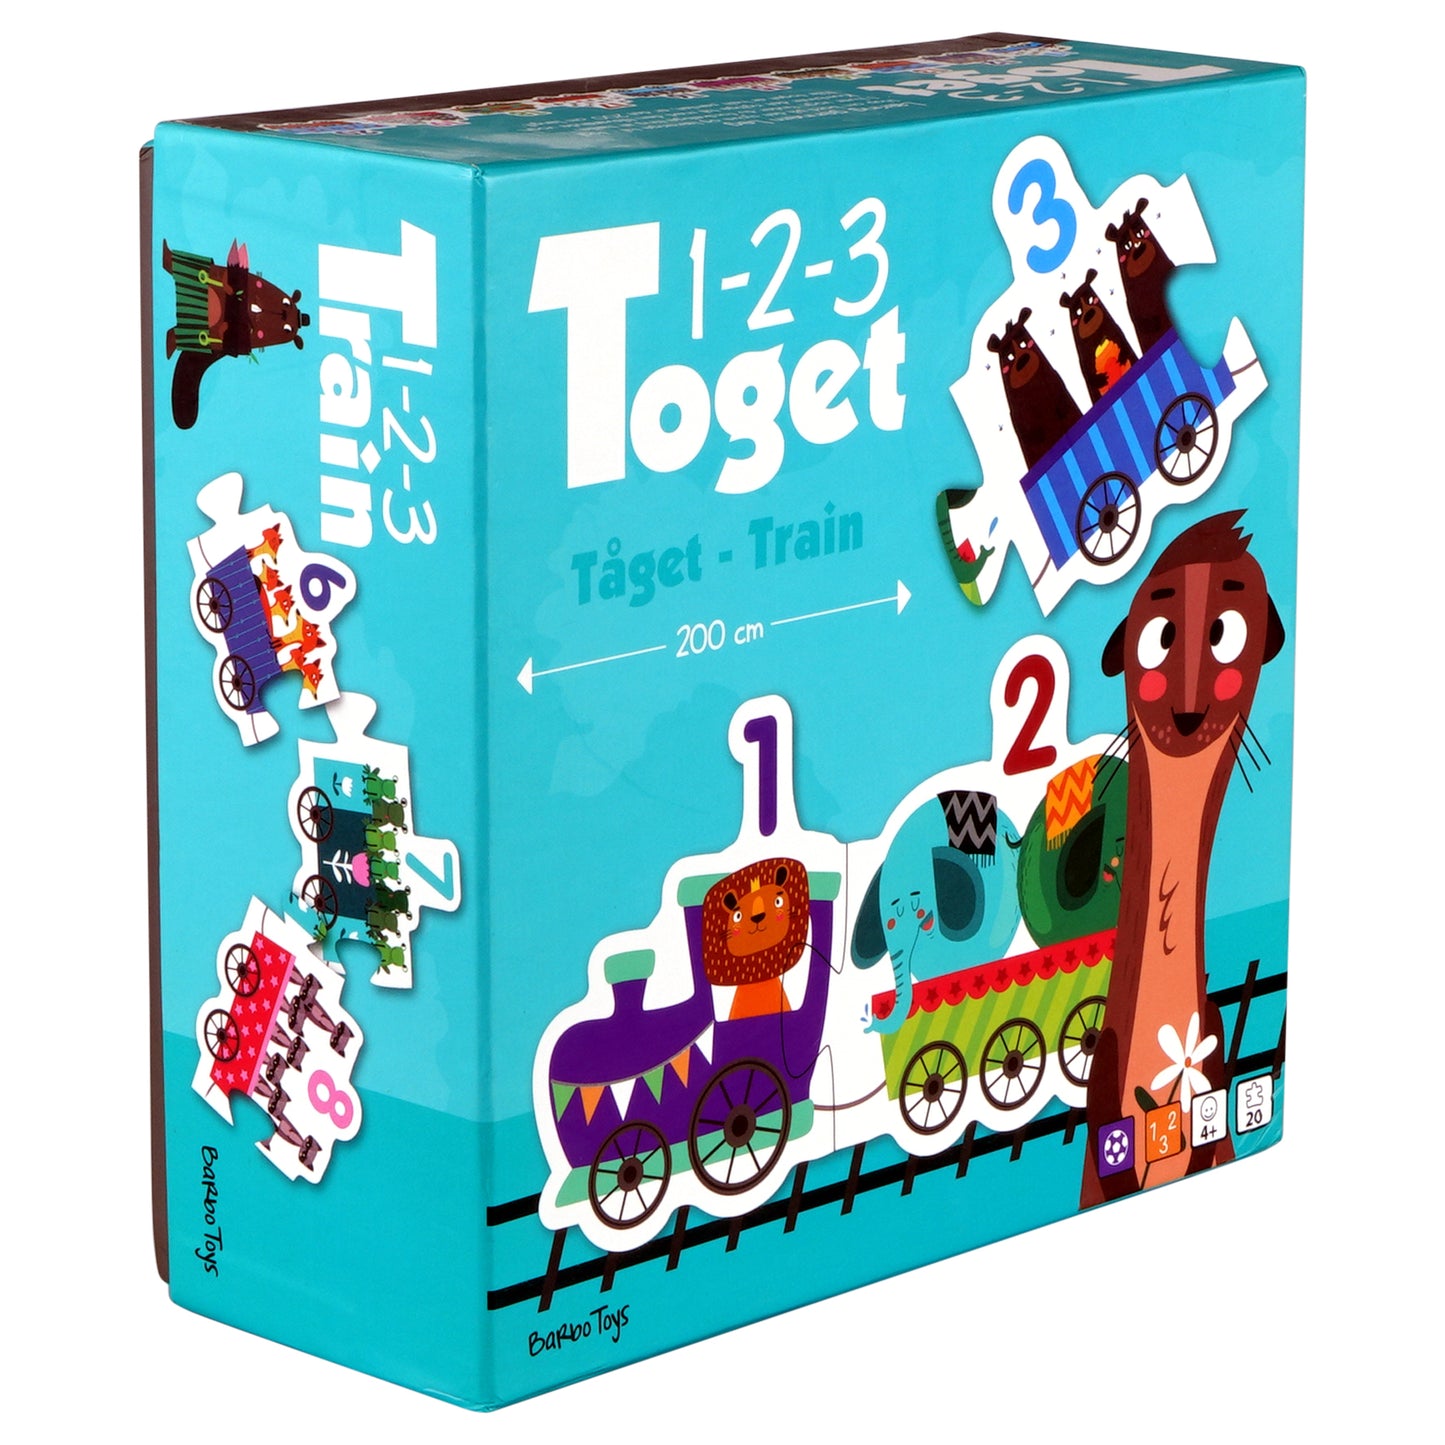 1 2 3 toget game box